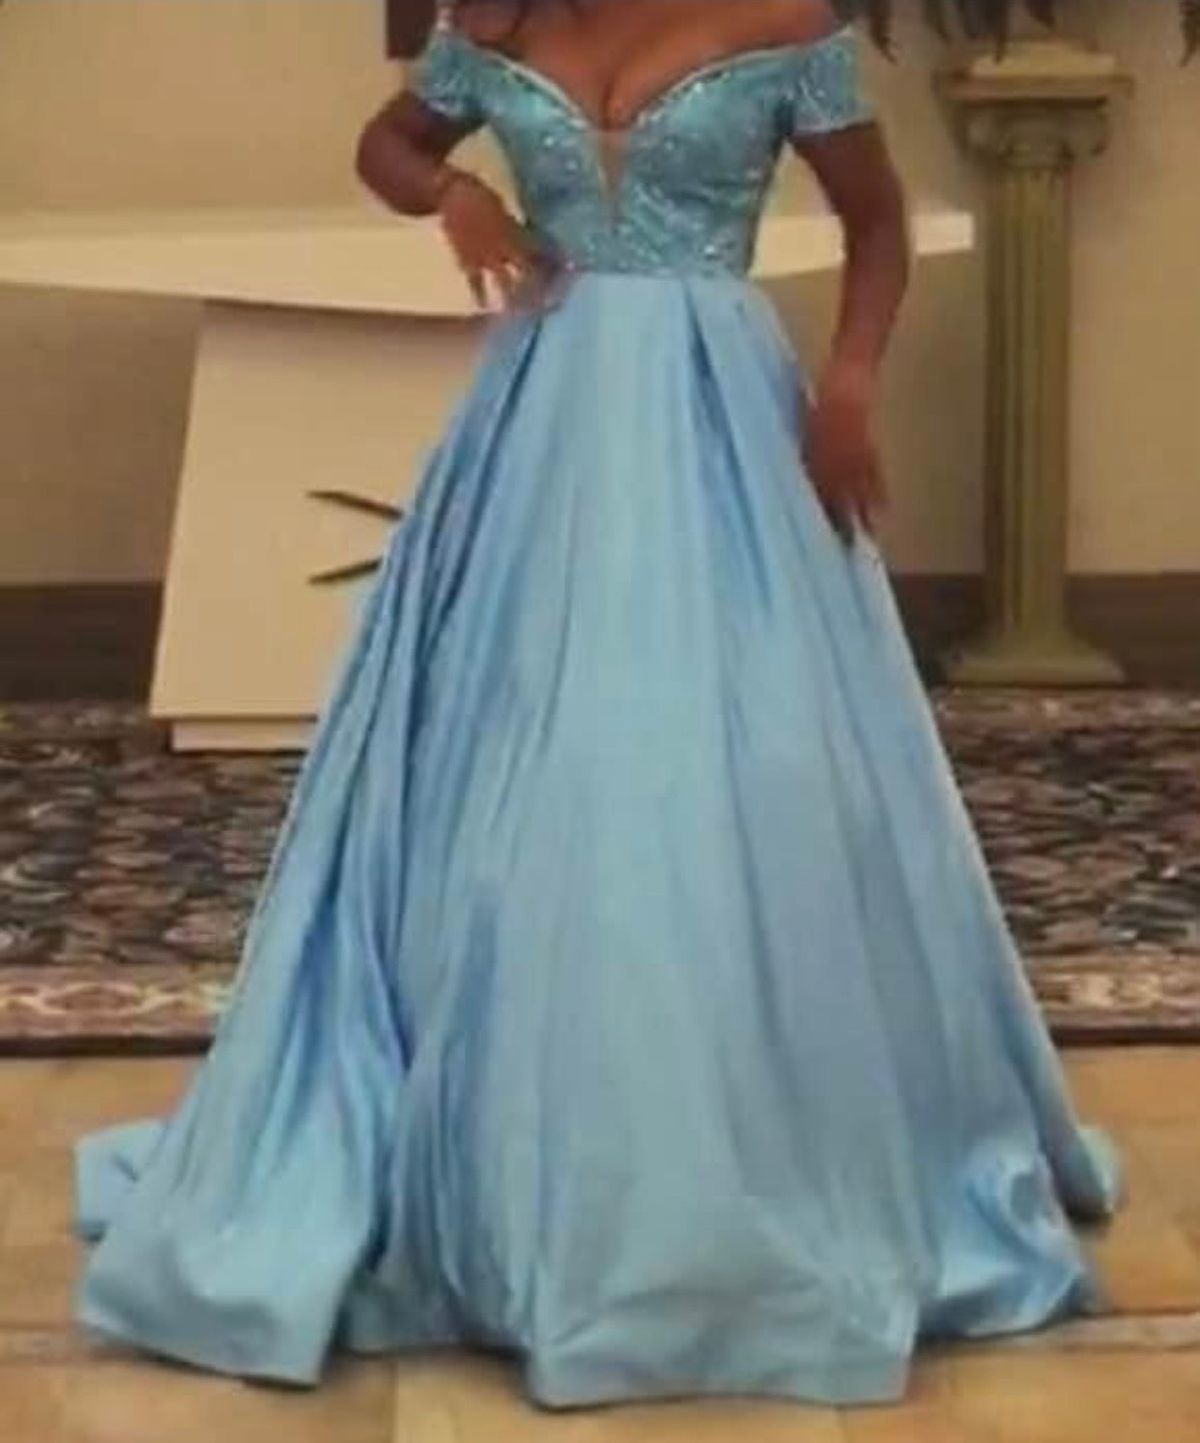 Sherri Hill Size 4 Prom Off The Shoulder Sequined Light Blue Ball Gown on Queenly